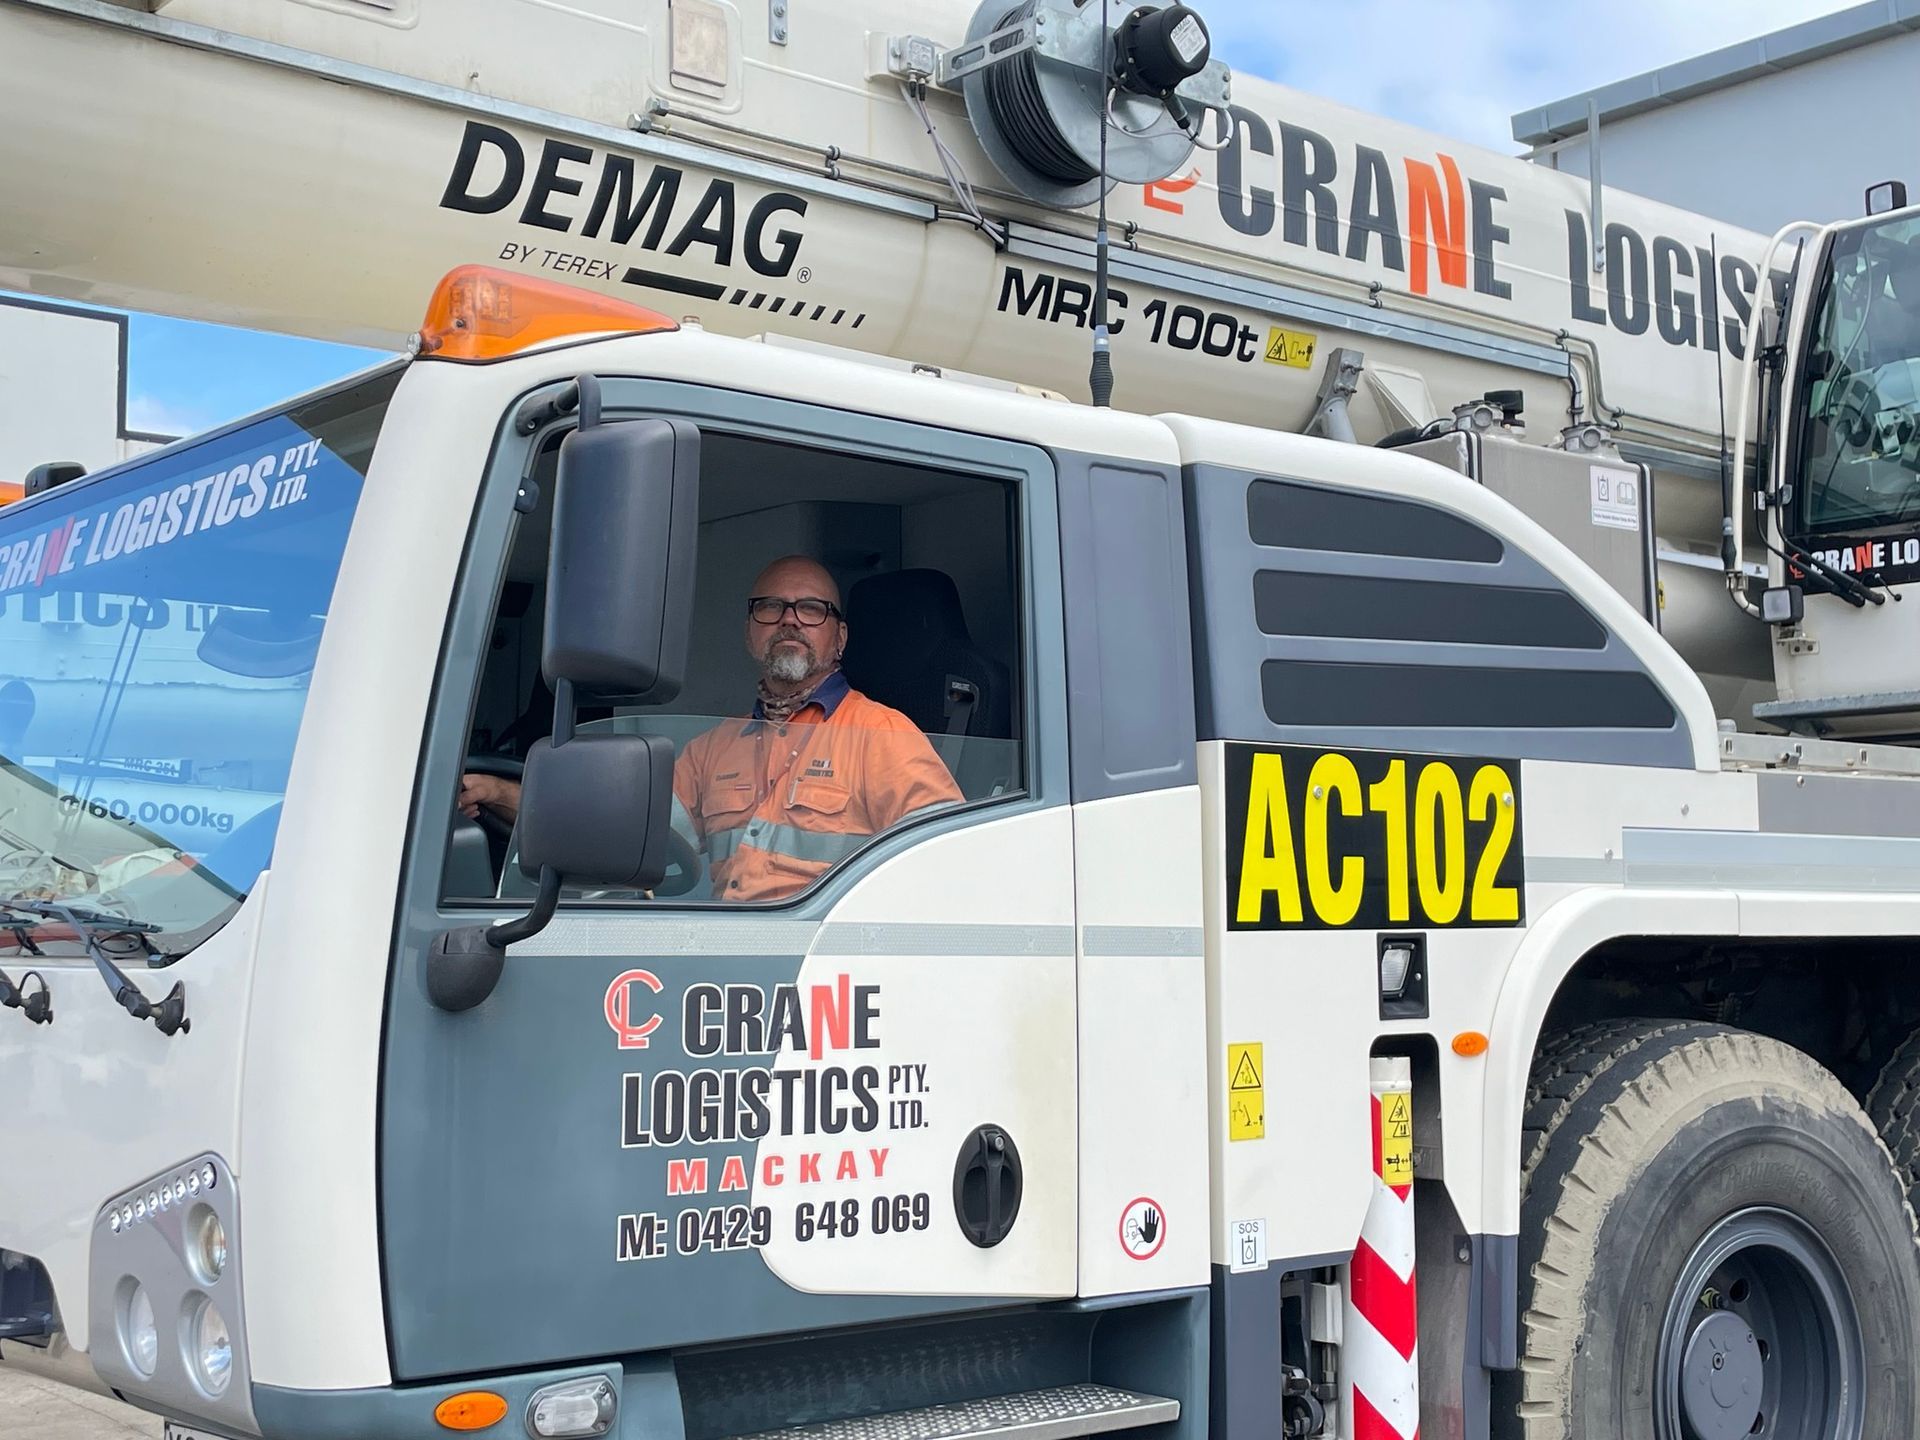 Operator Checking Crane — Cranes for Hire in Mackay, QLD